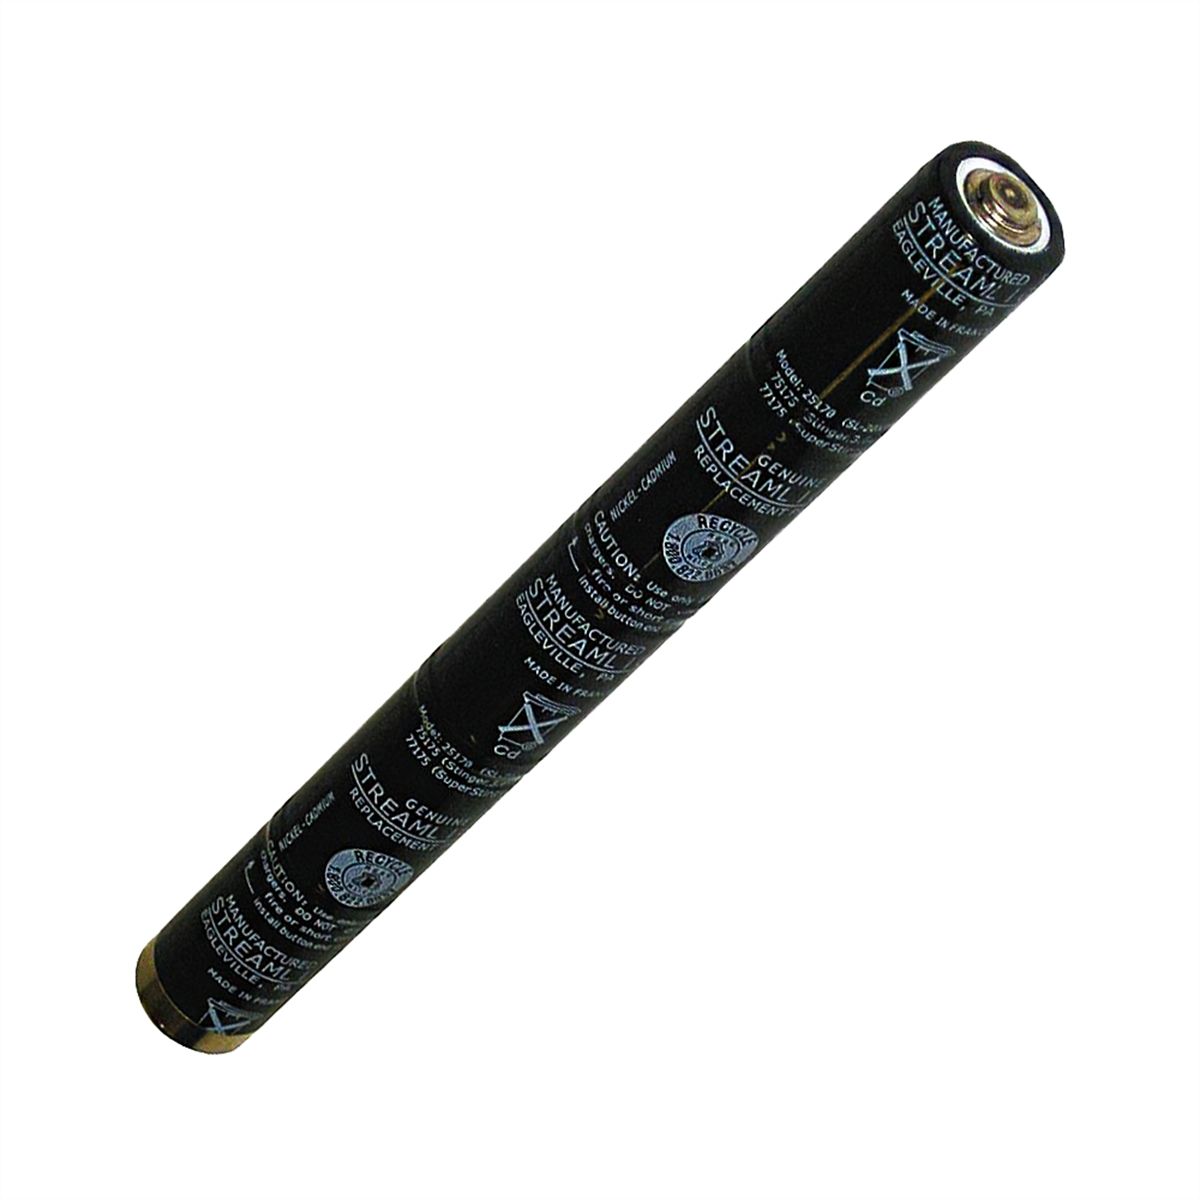 NiCd Battery Stick for SL-20XP Series